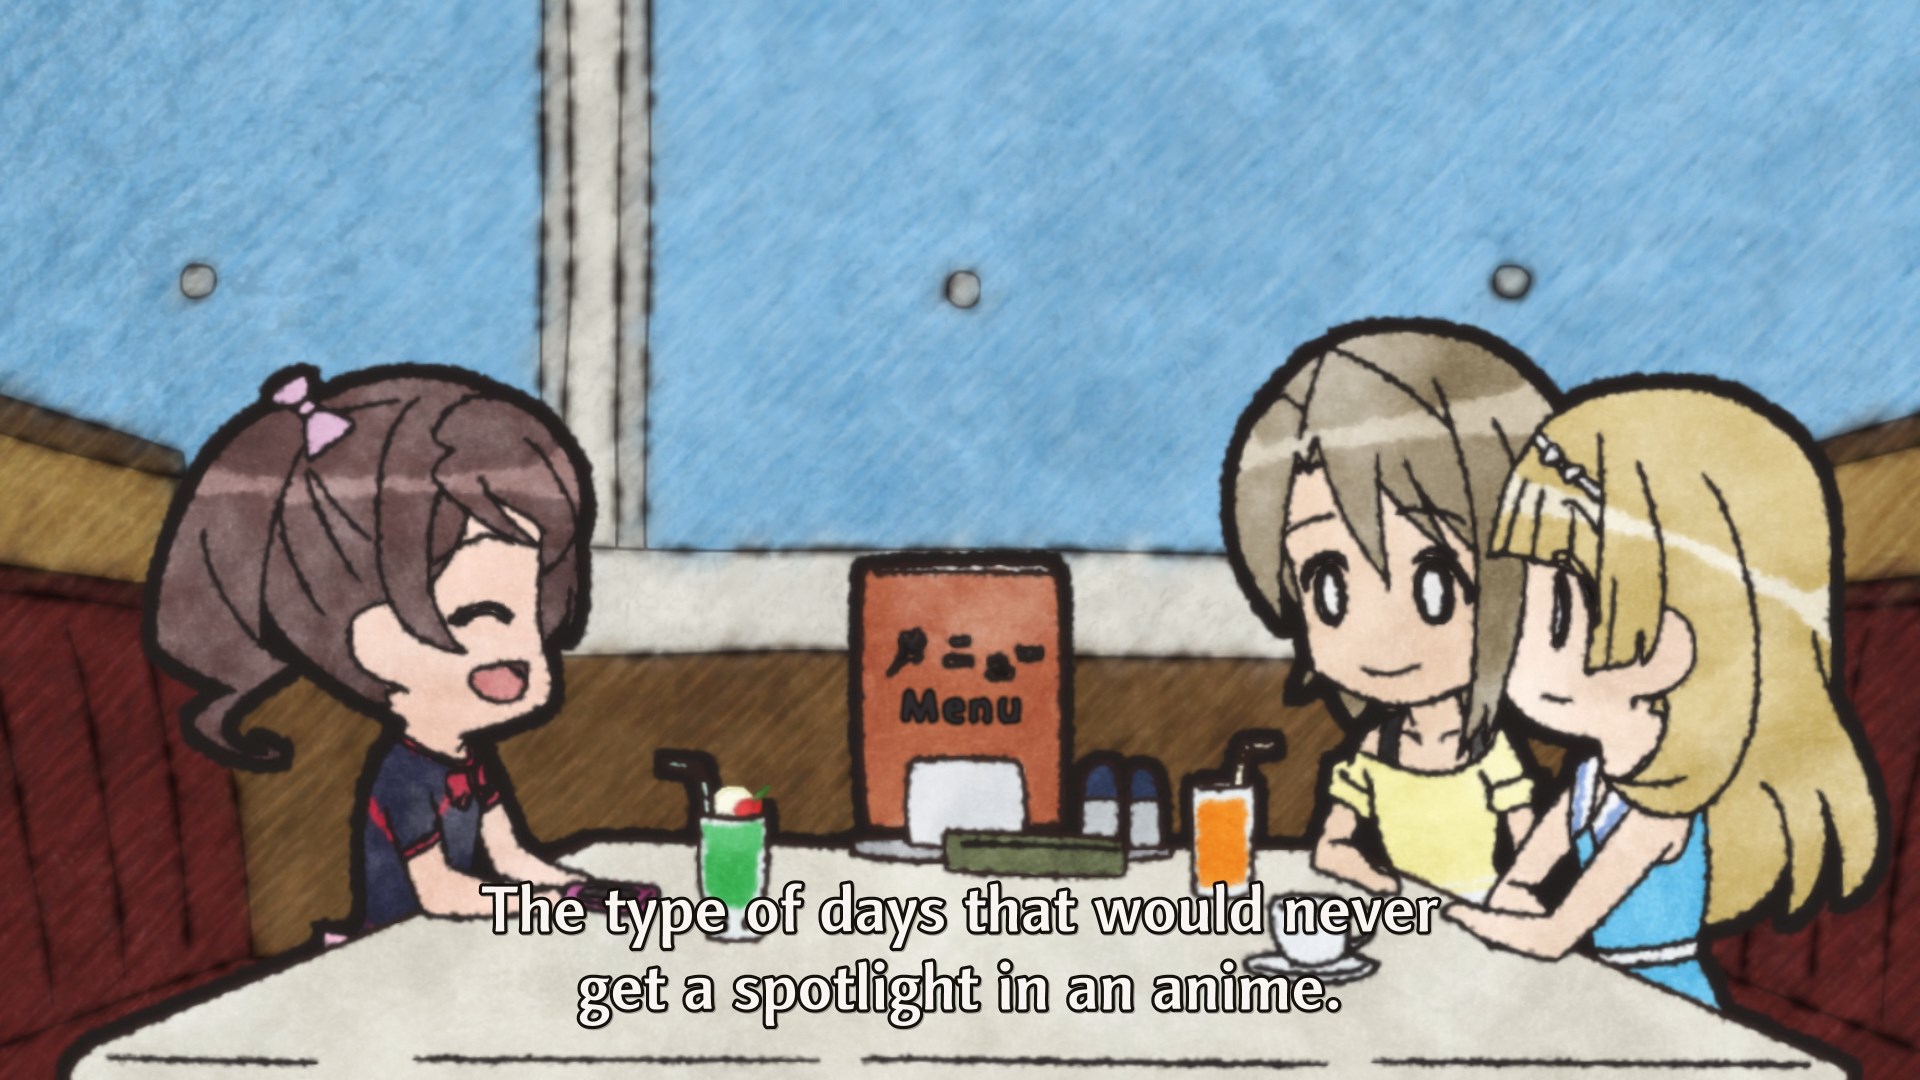 The type of days that would never get a spotlight in an anime.